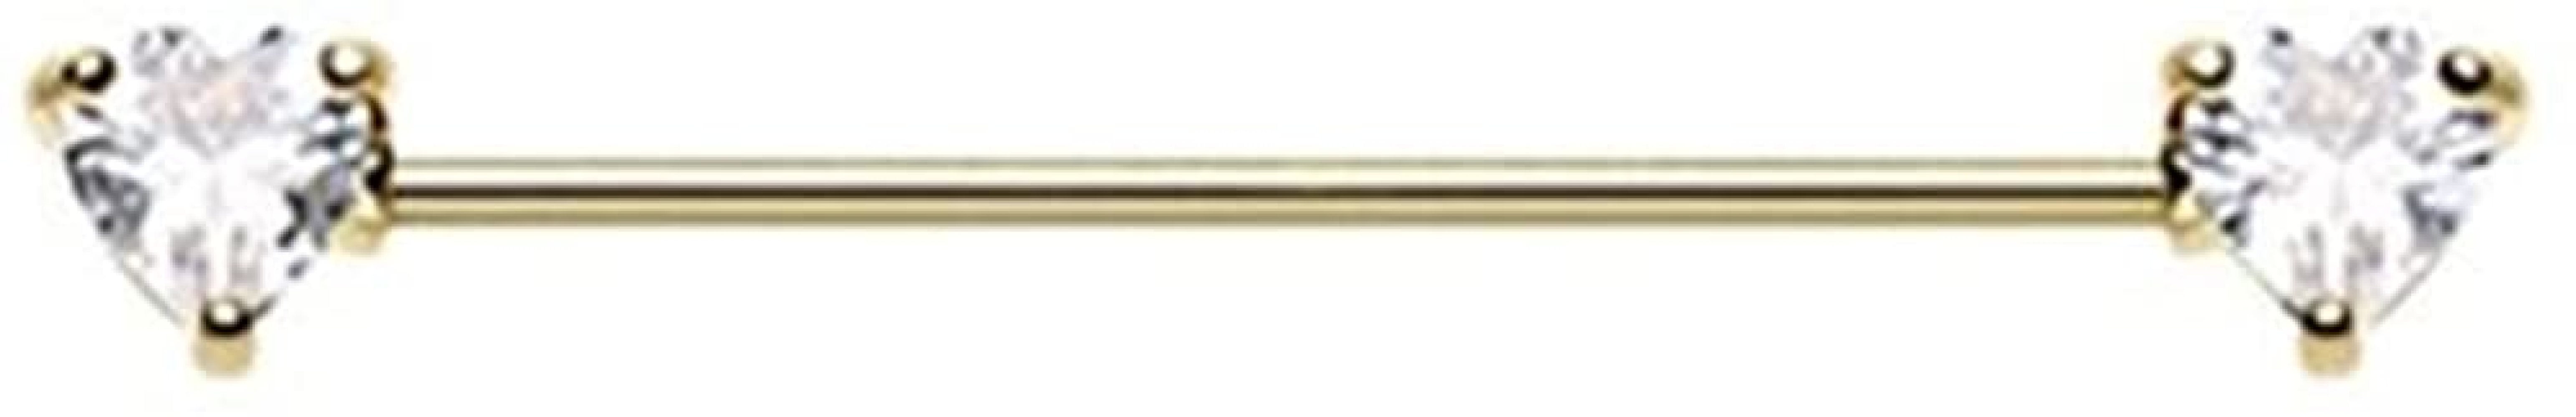 Covet Jewelry Gold Plated Basic Steel Barbell